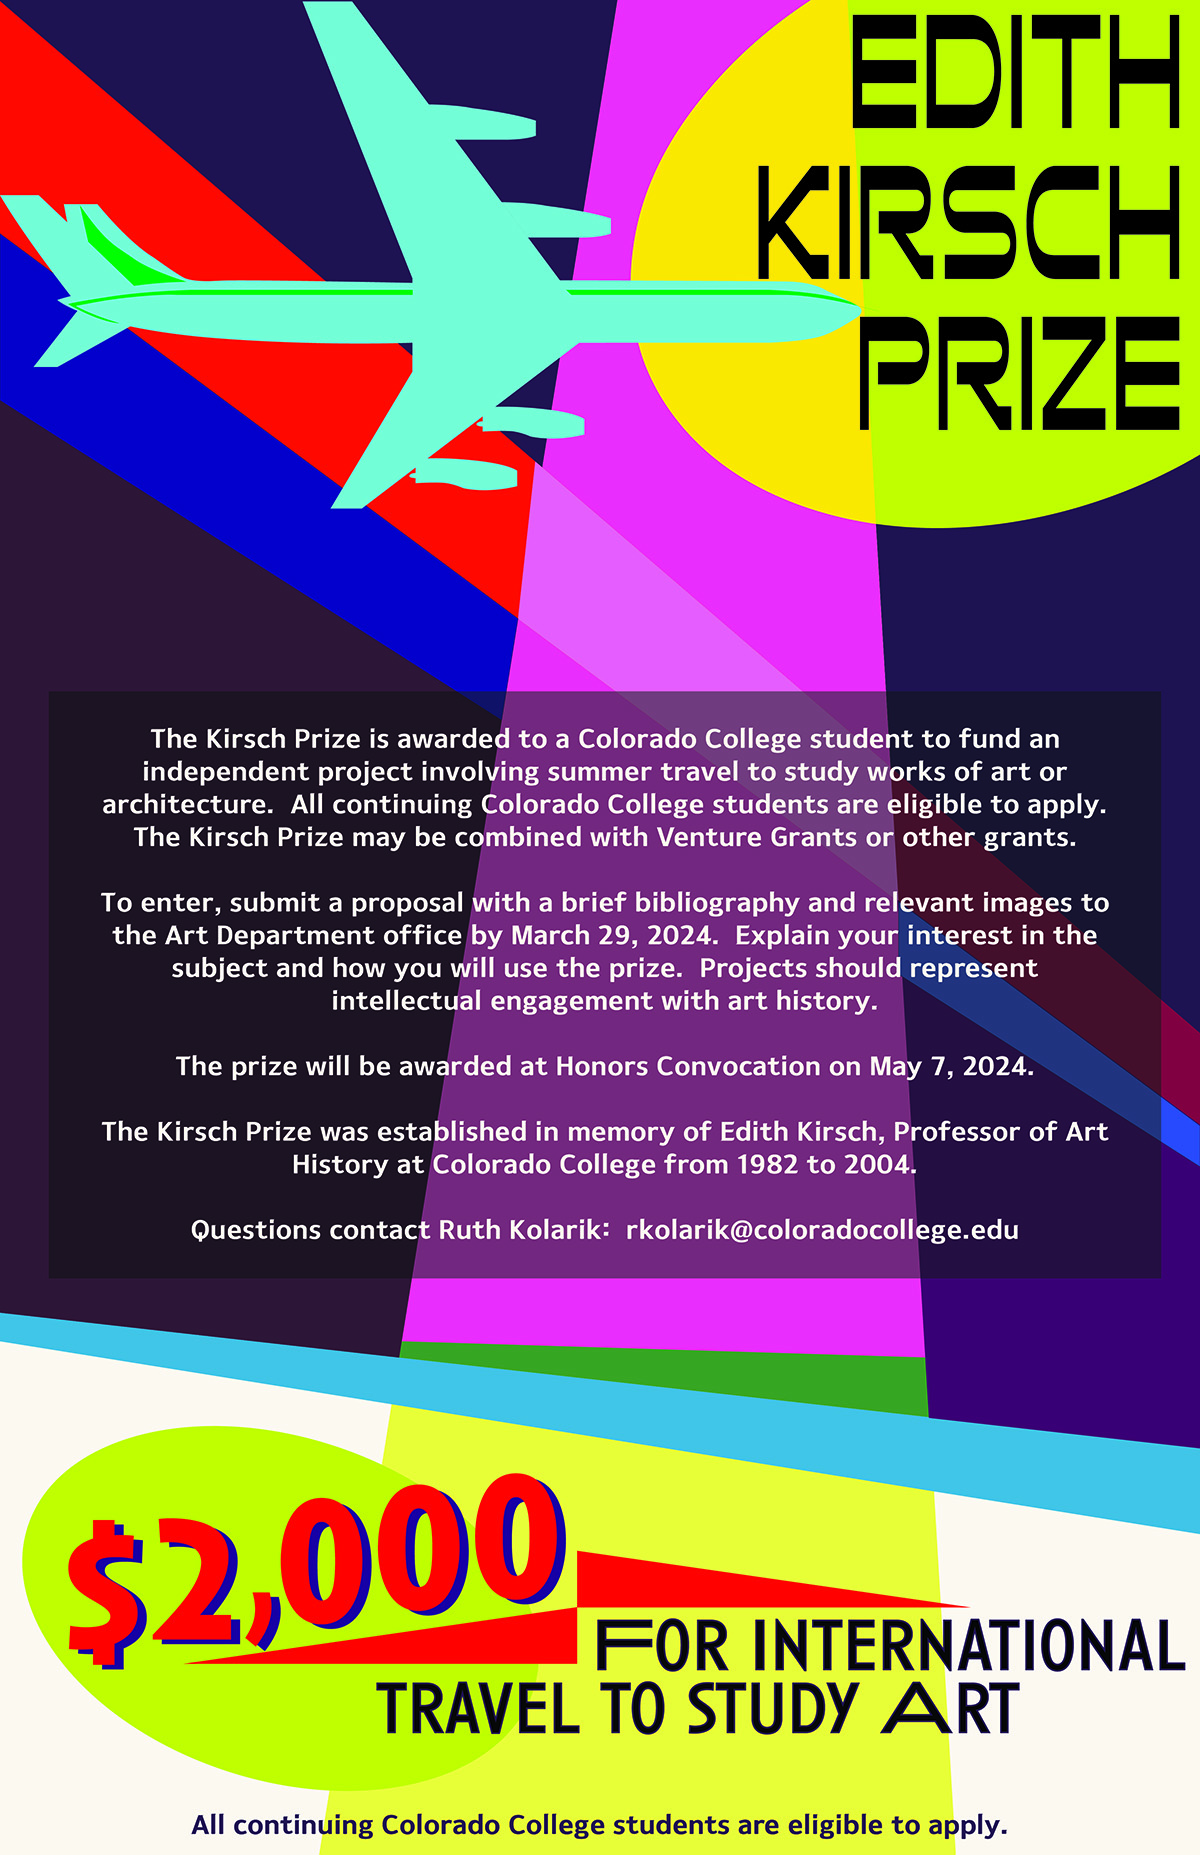 Kirsch poster with airplane and text about the prize